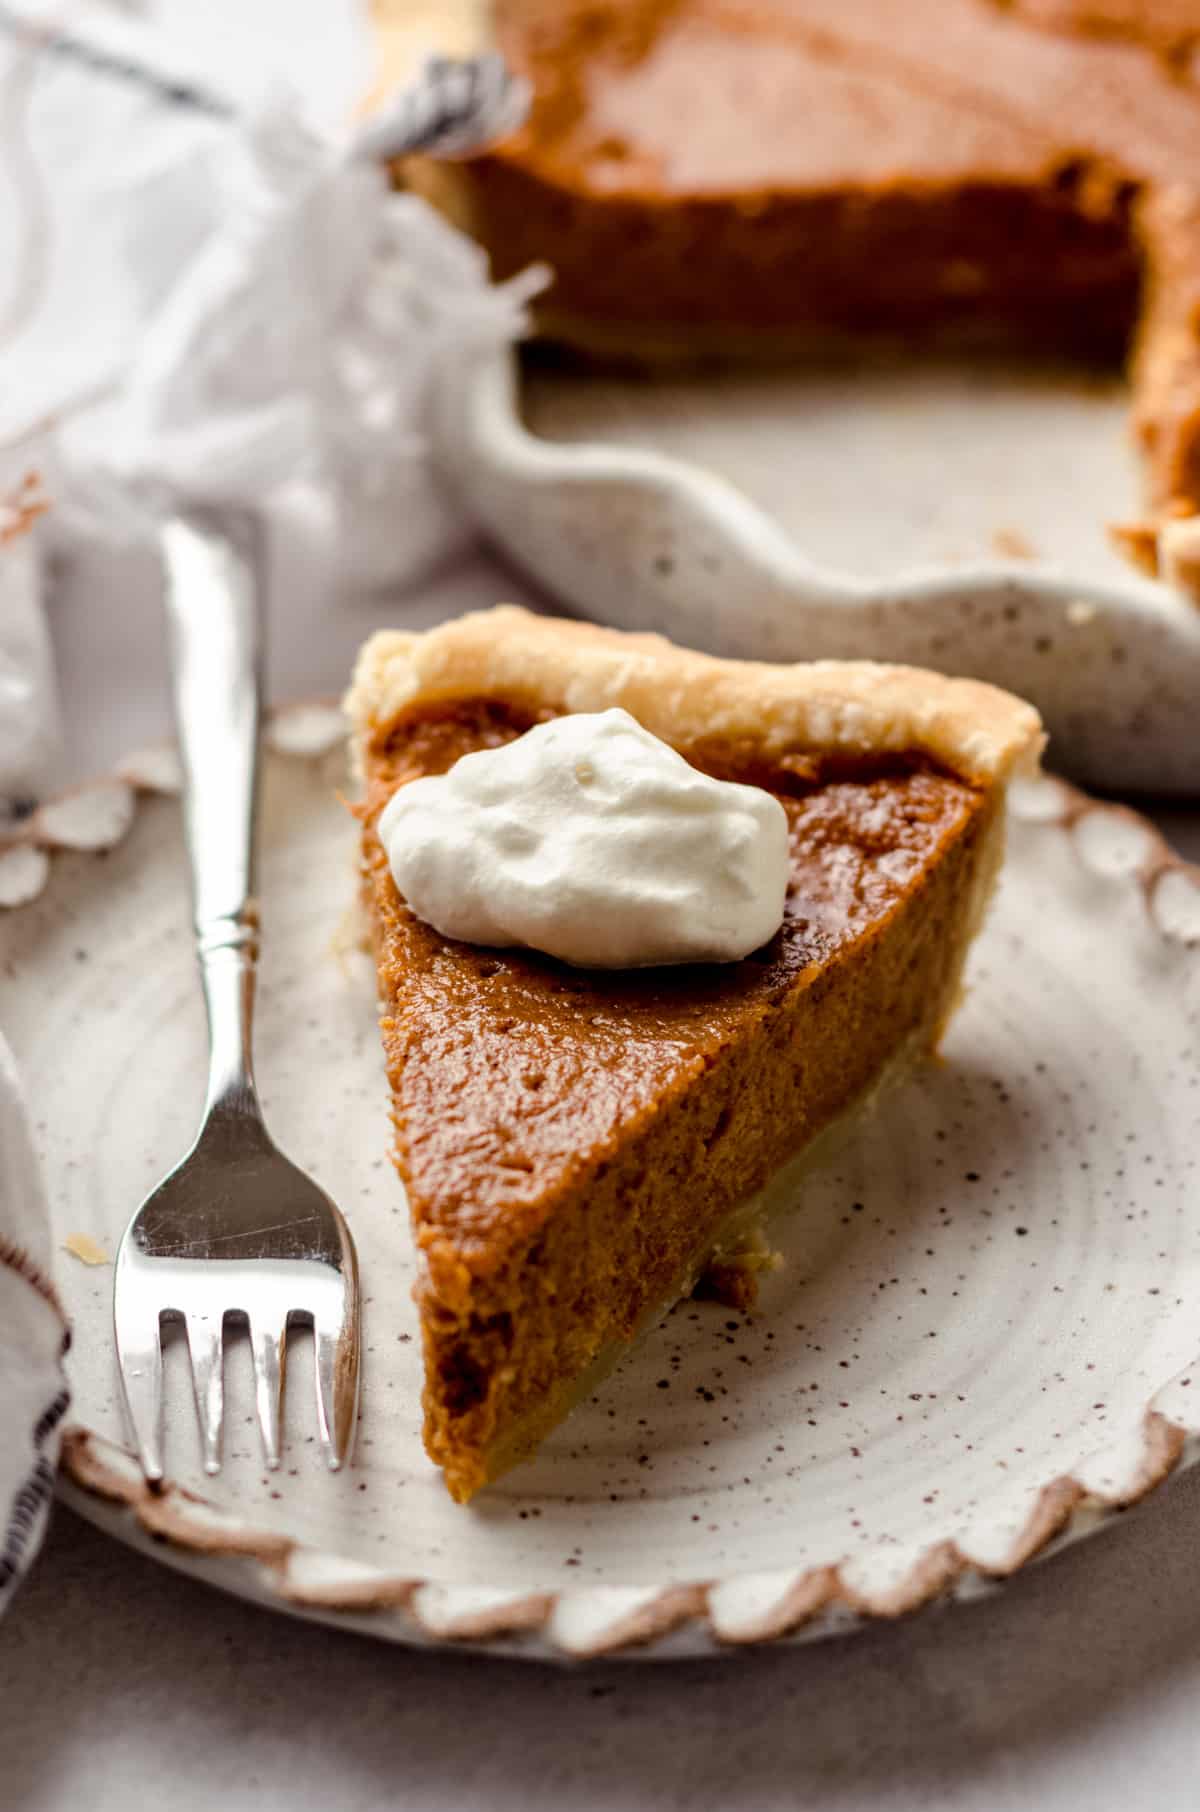 A slice of sweet potato pie on a plate, topped with whipped cream.